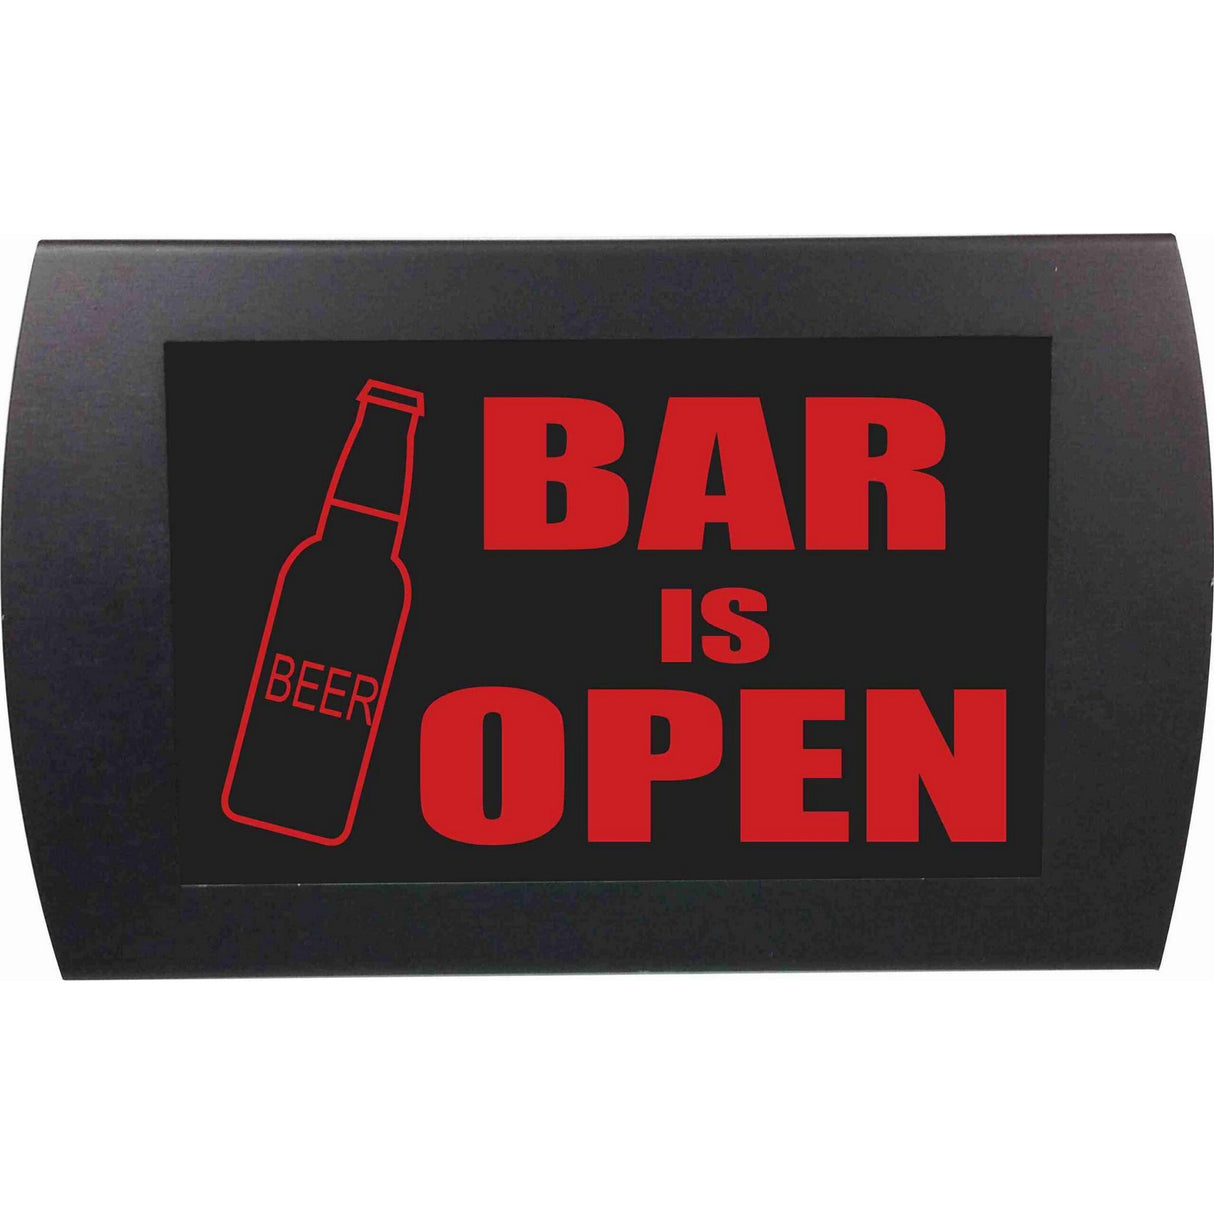 American Recorder OAS-2015M-RD "BAR IS OPEN" LED Lighted Sign, Red